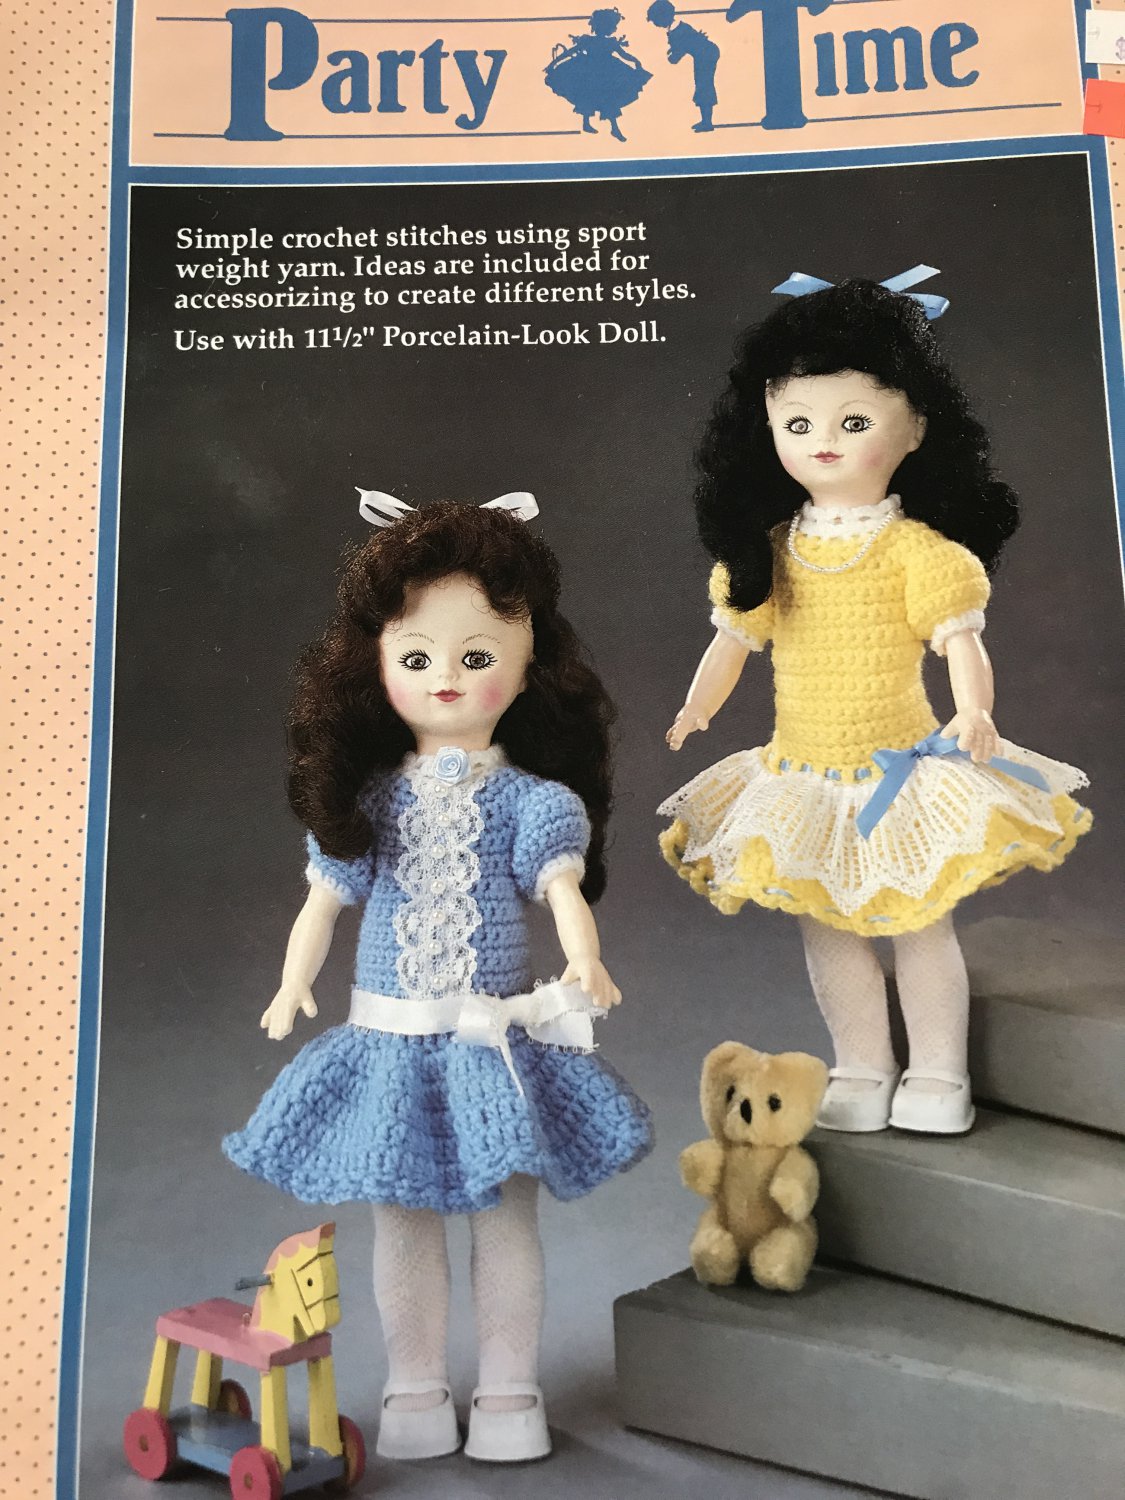 Party Time Dresses Crochet Pattern Fibre Craft 215 for 11 1/2" doll